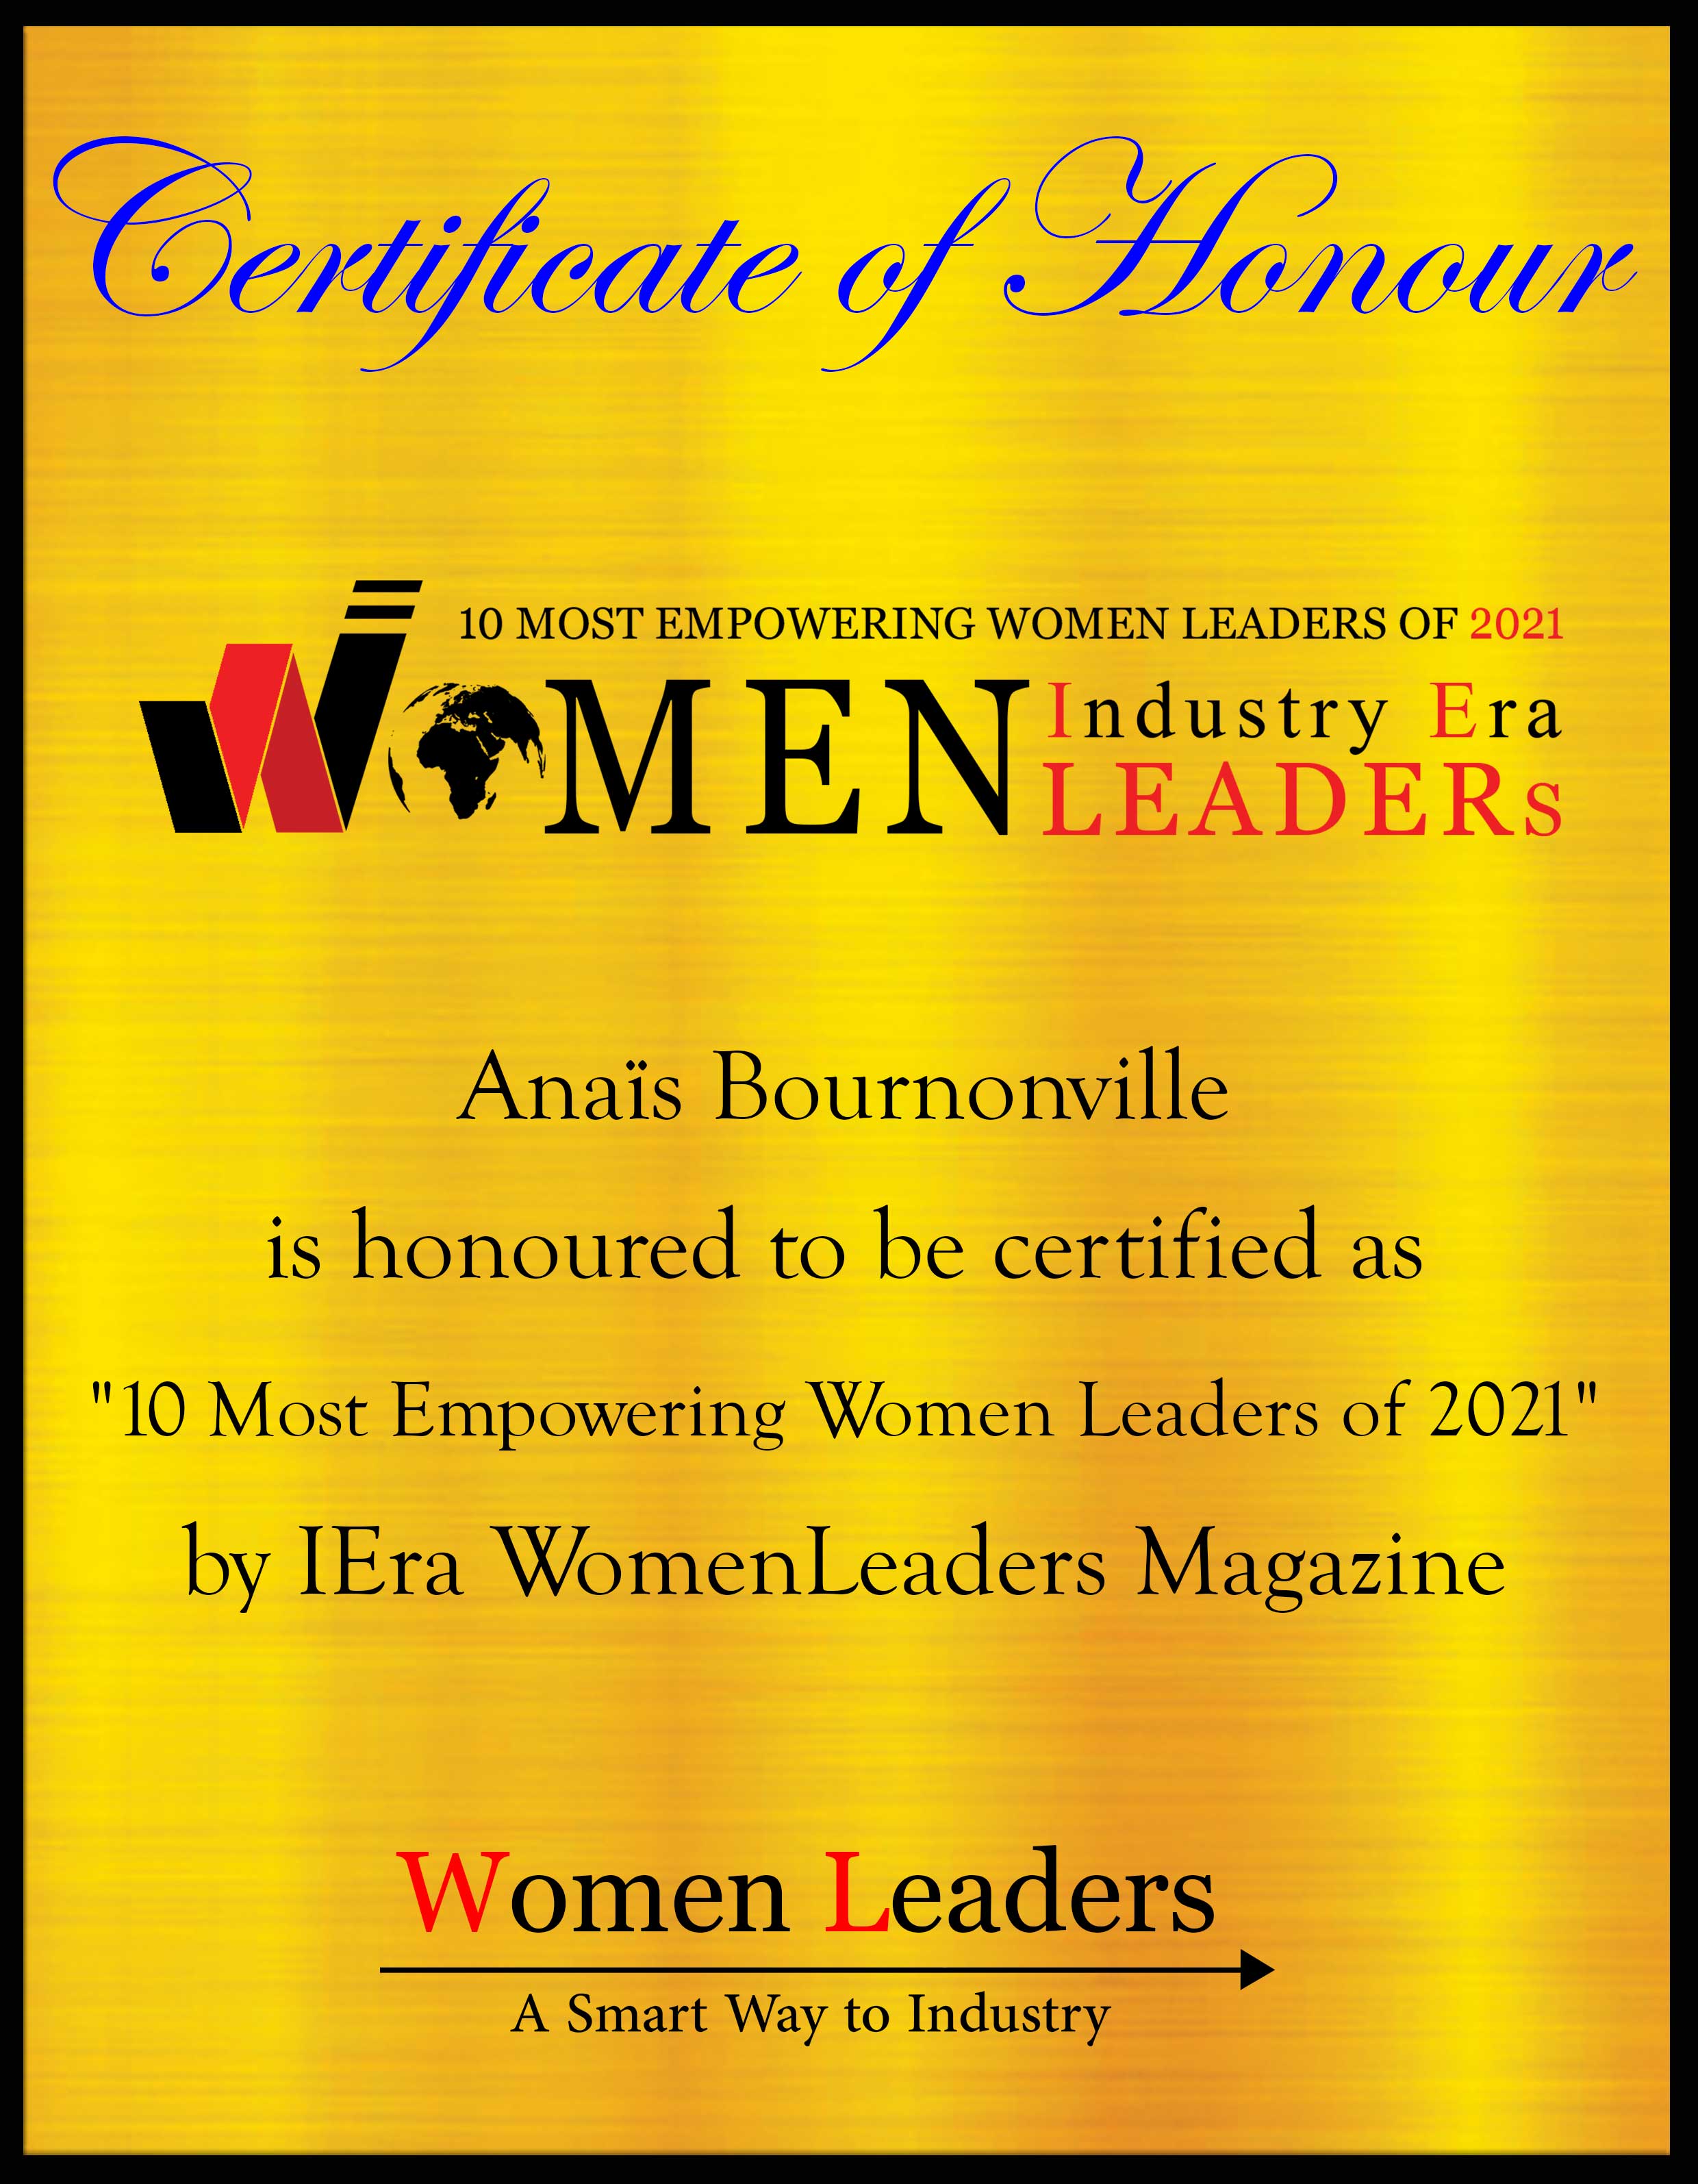 Anaïs Bournonville, Head of Luxury Division of Gentlemen Marketing Agency, Most Empowering Women Leaders of 2021